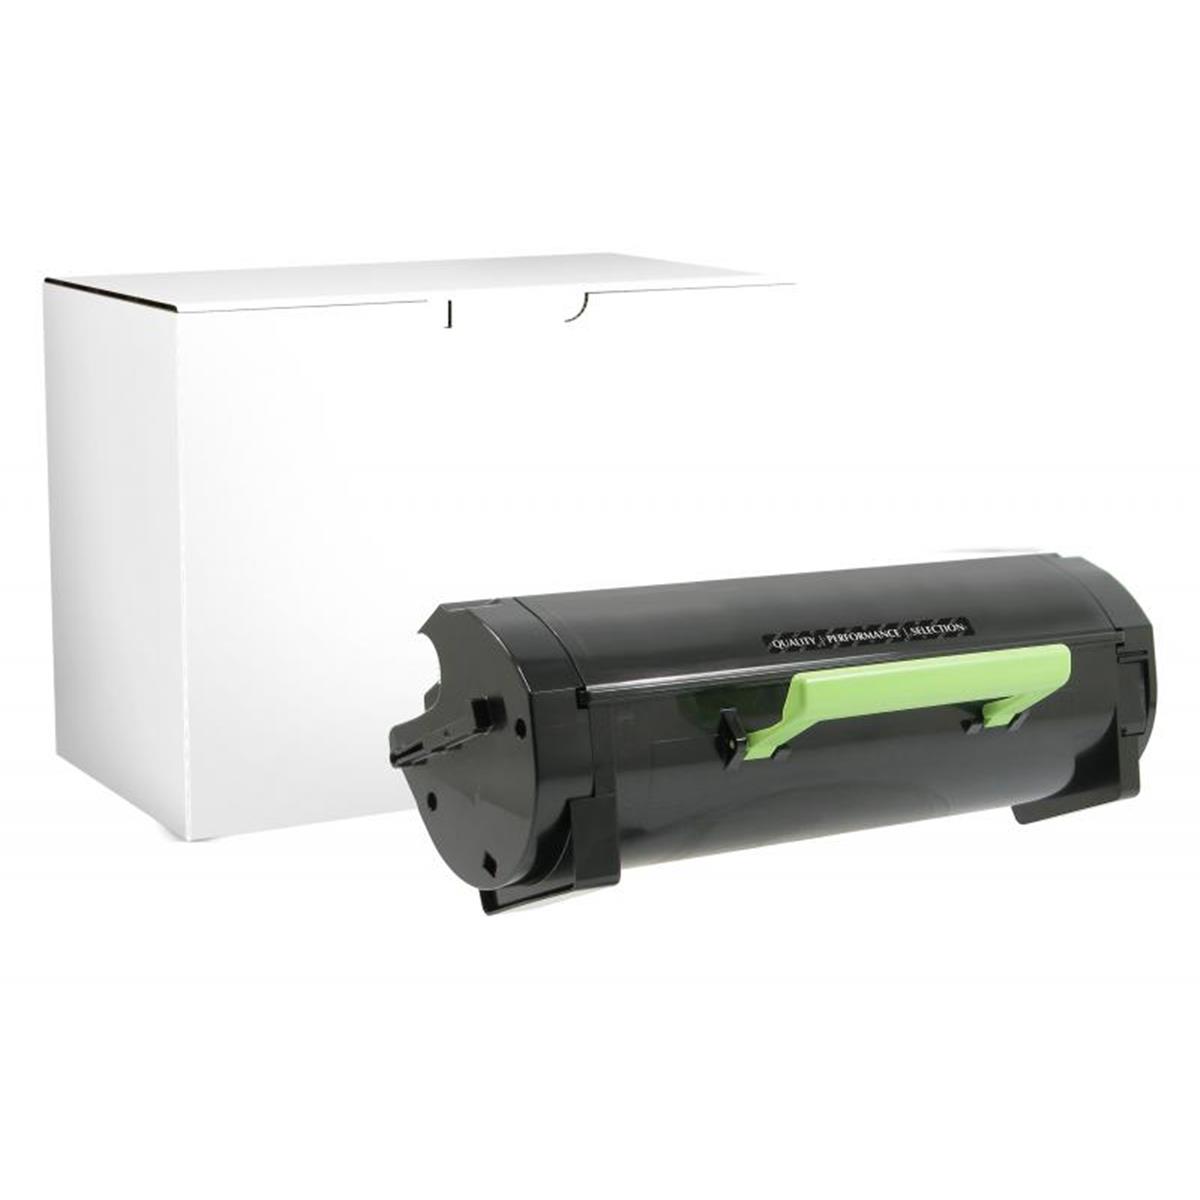 Picture of Dell 200902 High Yield Toner Cartridge for Dell S2830